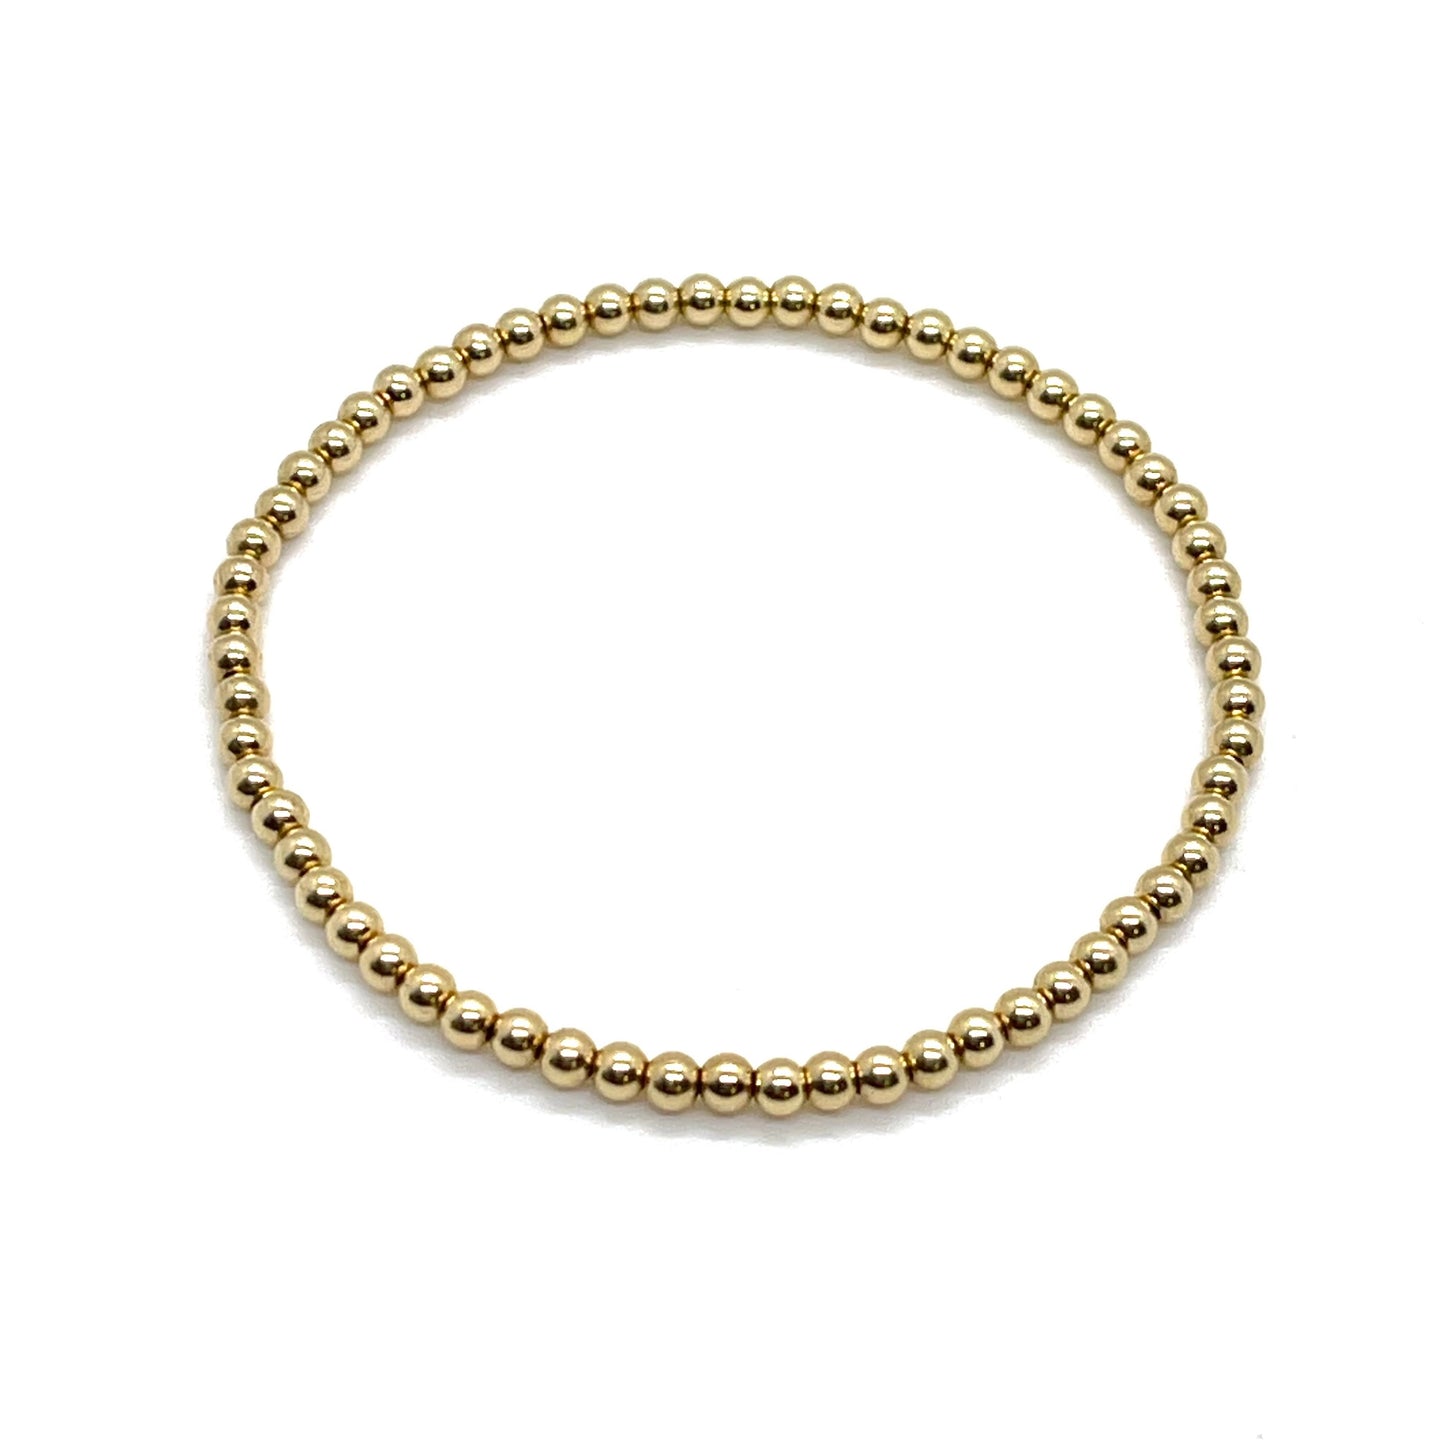 Gold bracelet for women with 3mm waterproof, tarnish-free 14K gold filled beads hand strung on stretch cord. 